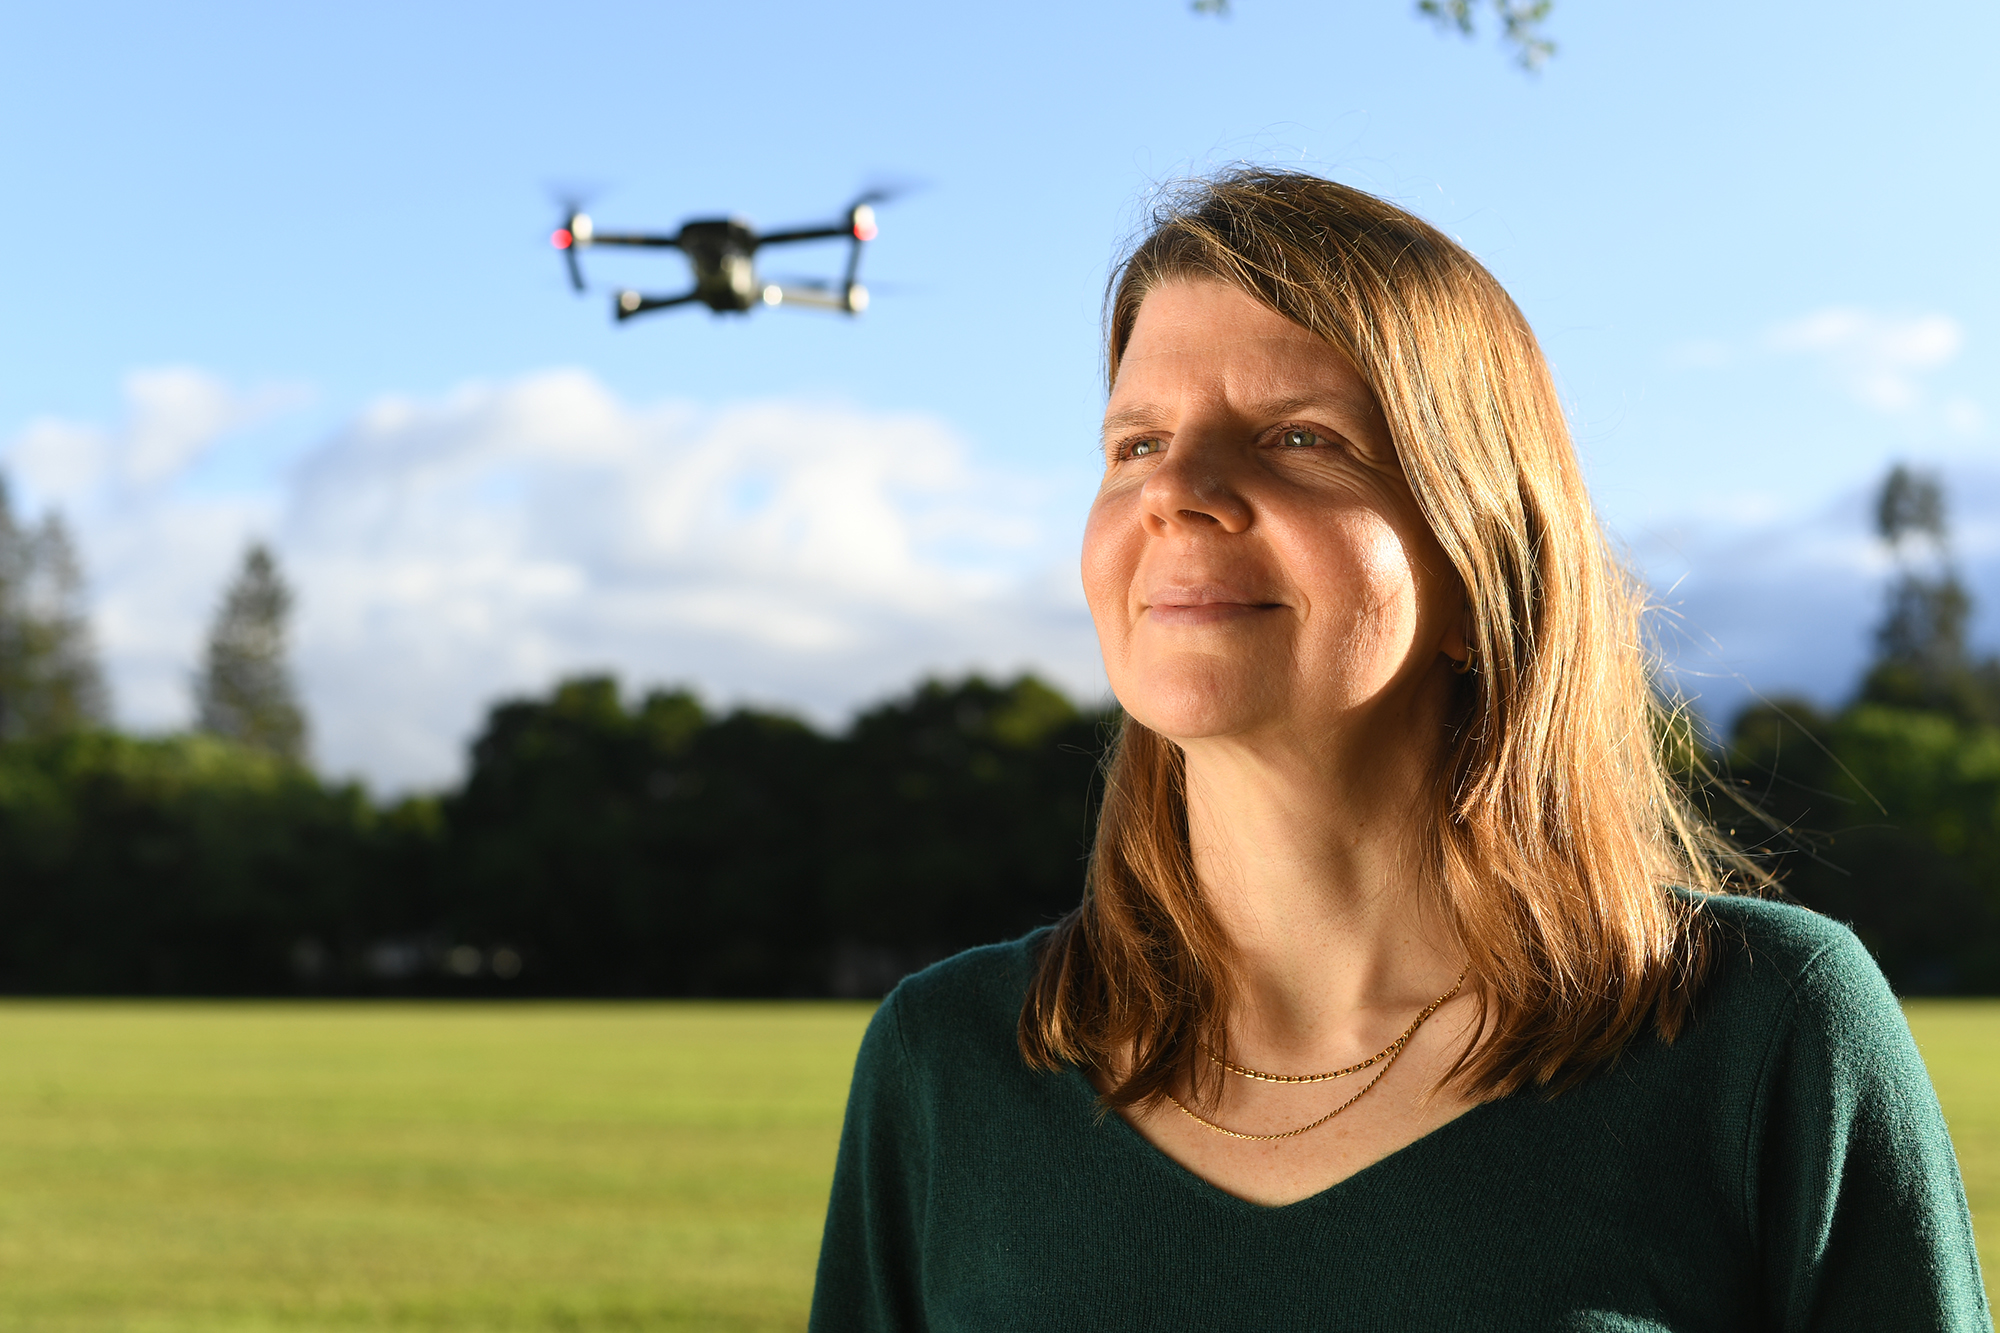 woman in green sweater looking to side with drone in air in background